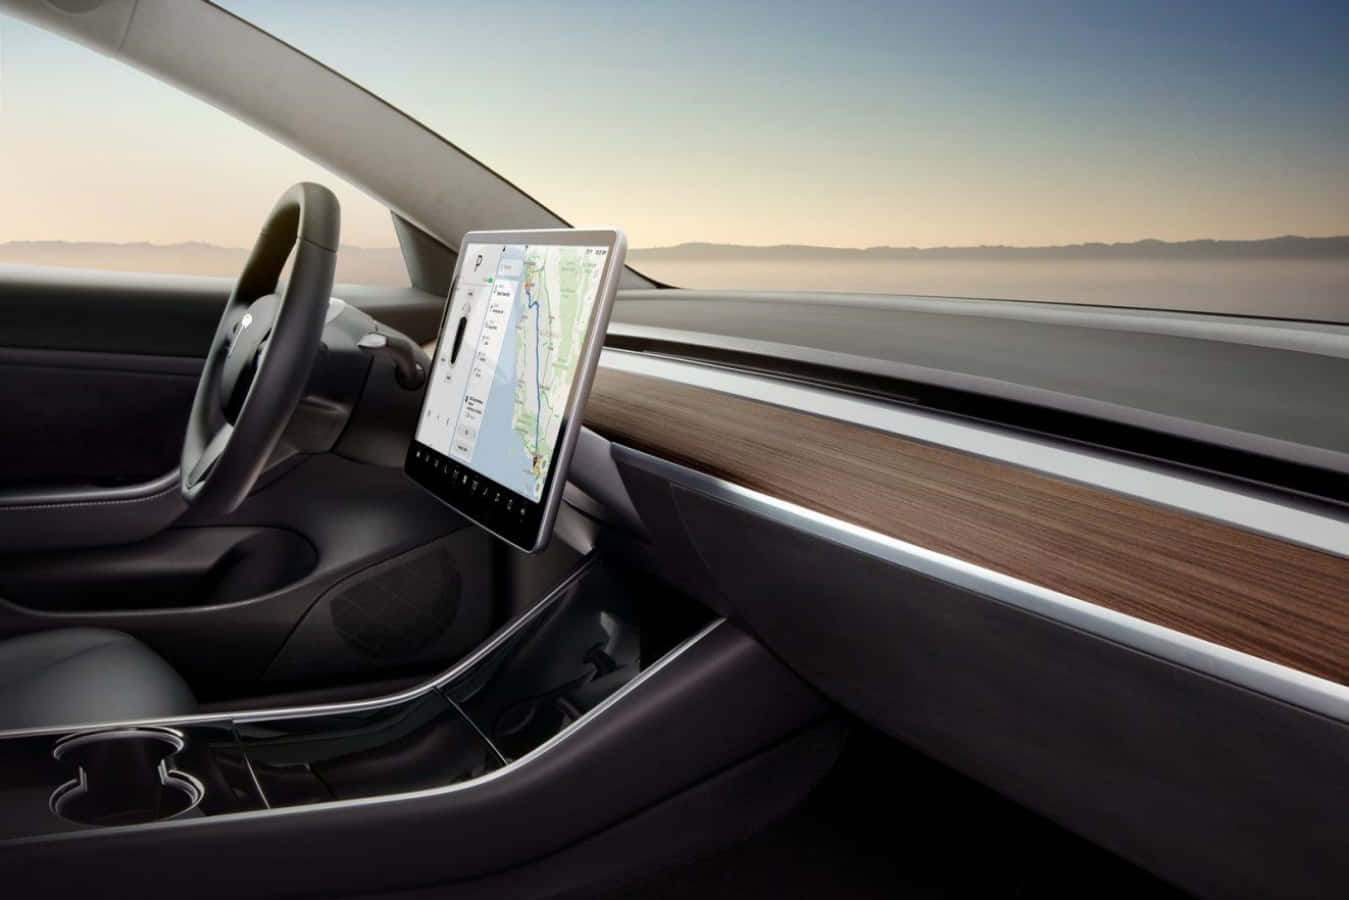 "Experience the Future. Drive the Tesla Model 3."